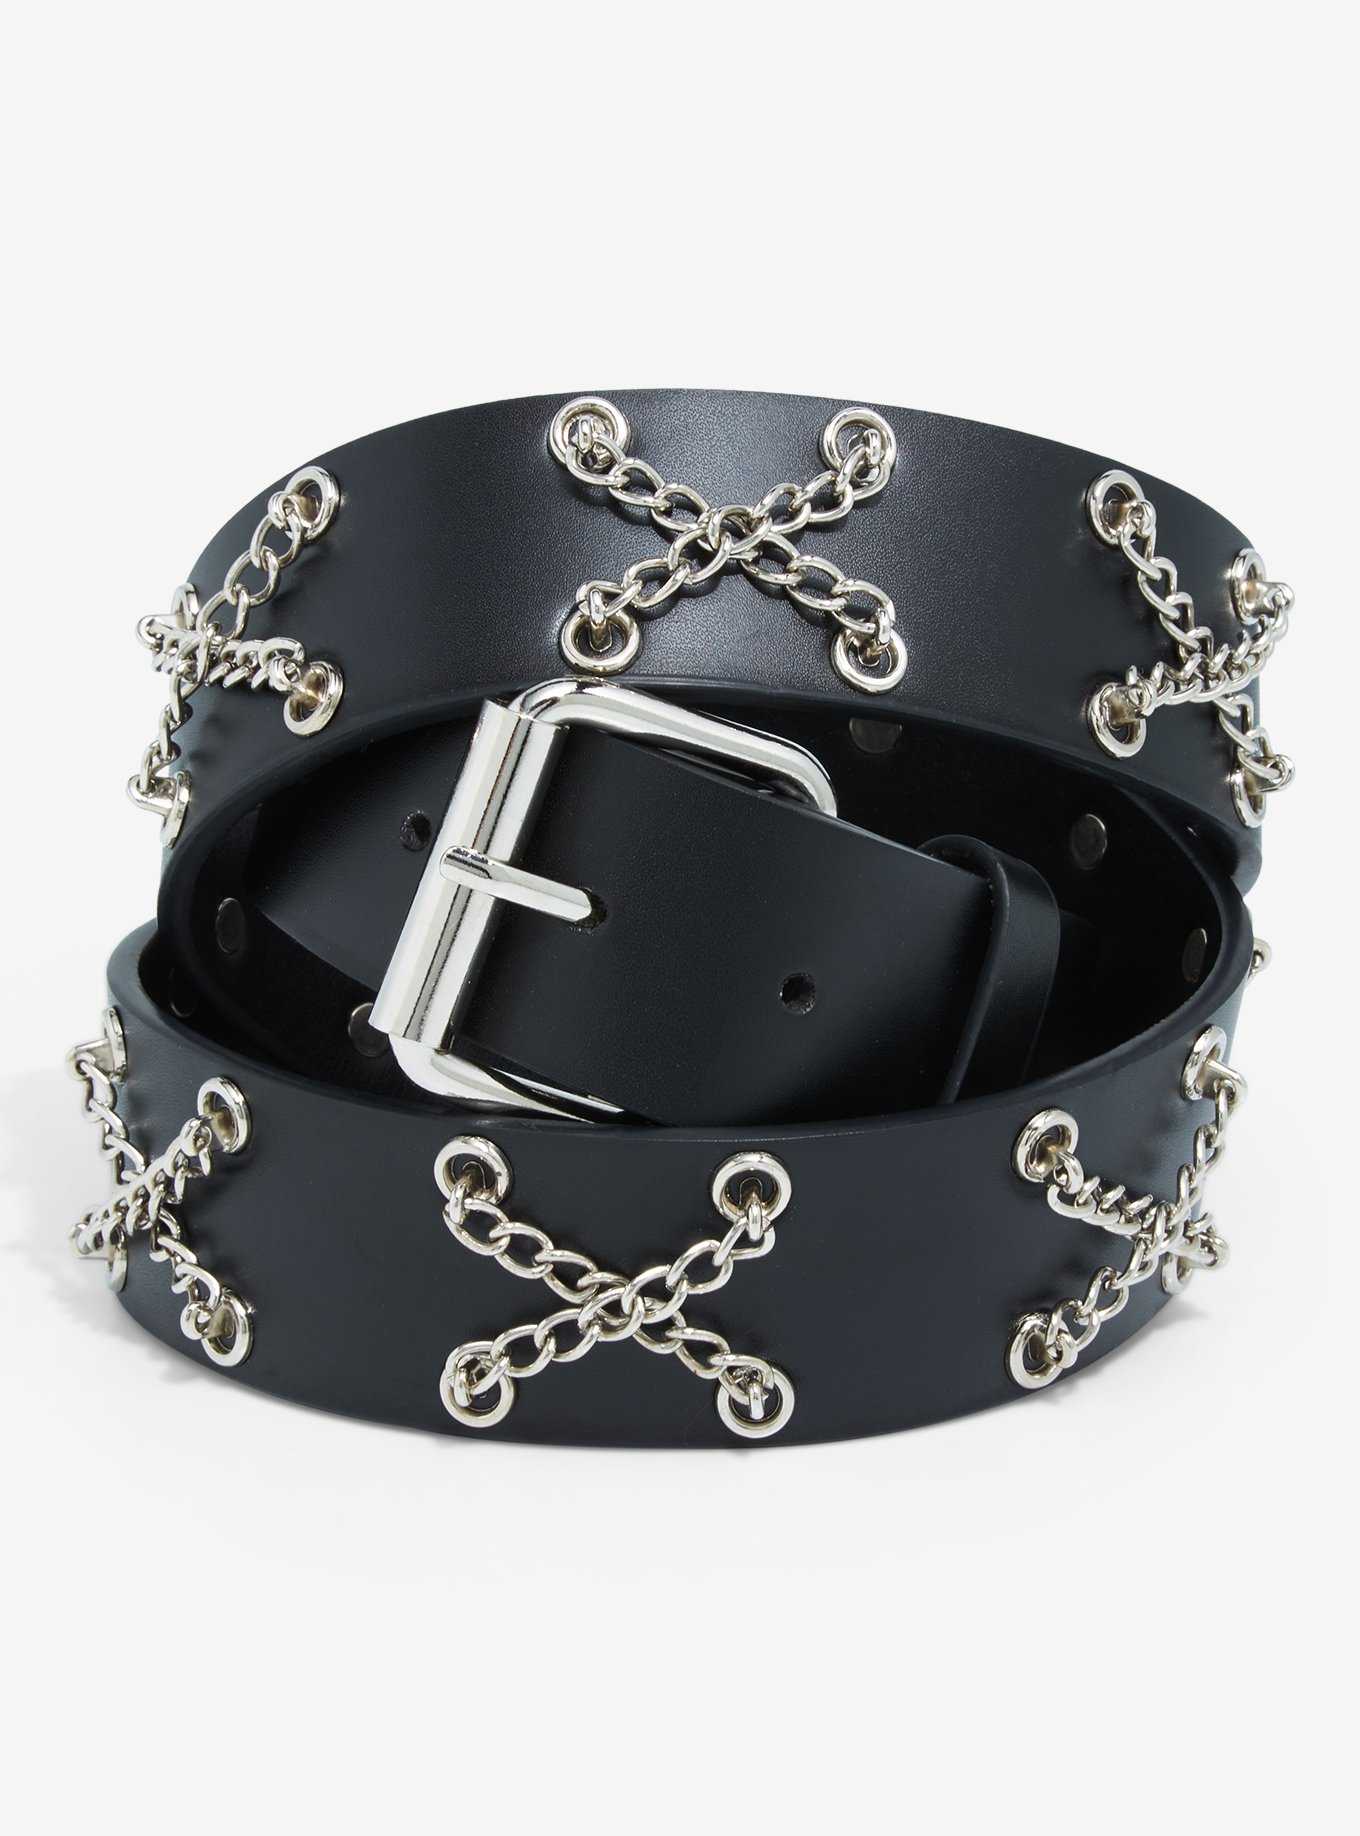 Metal Chain Accessories Four-Piece Set Front Open Buckle Sexy